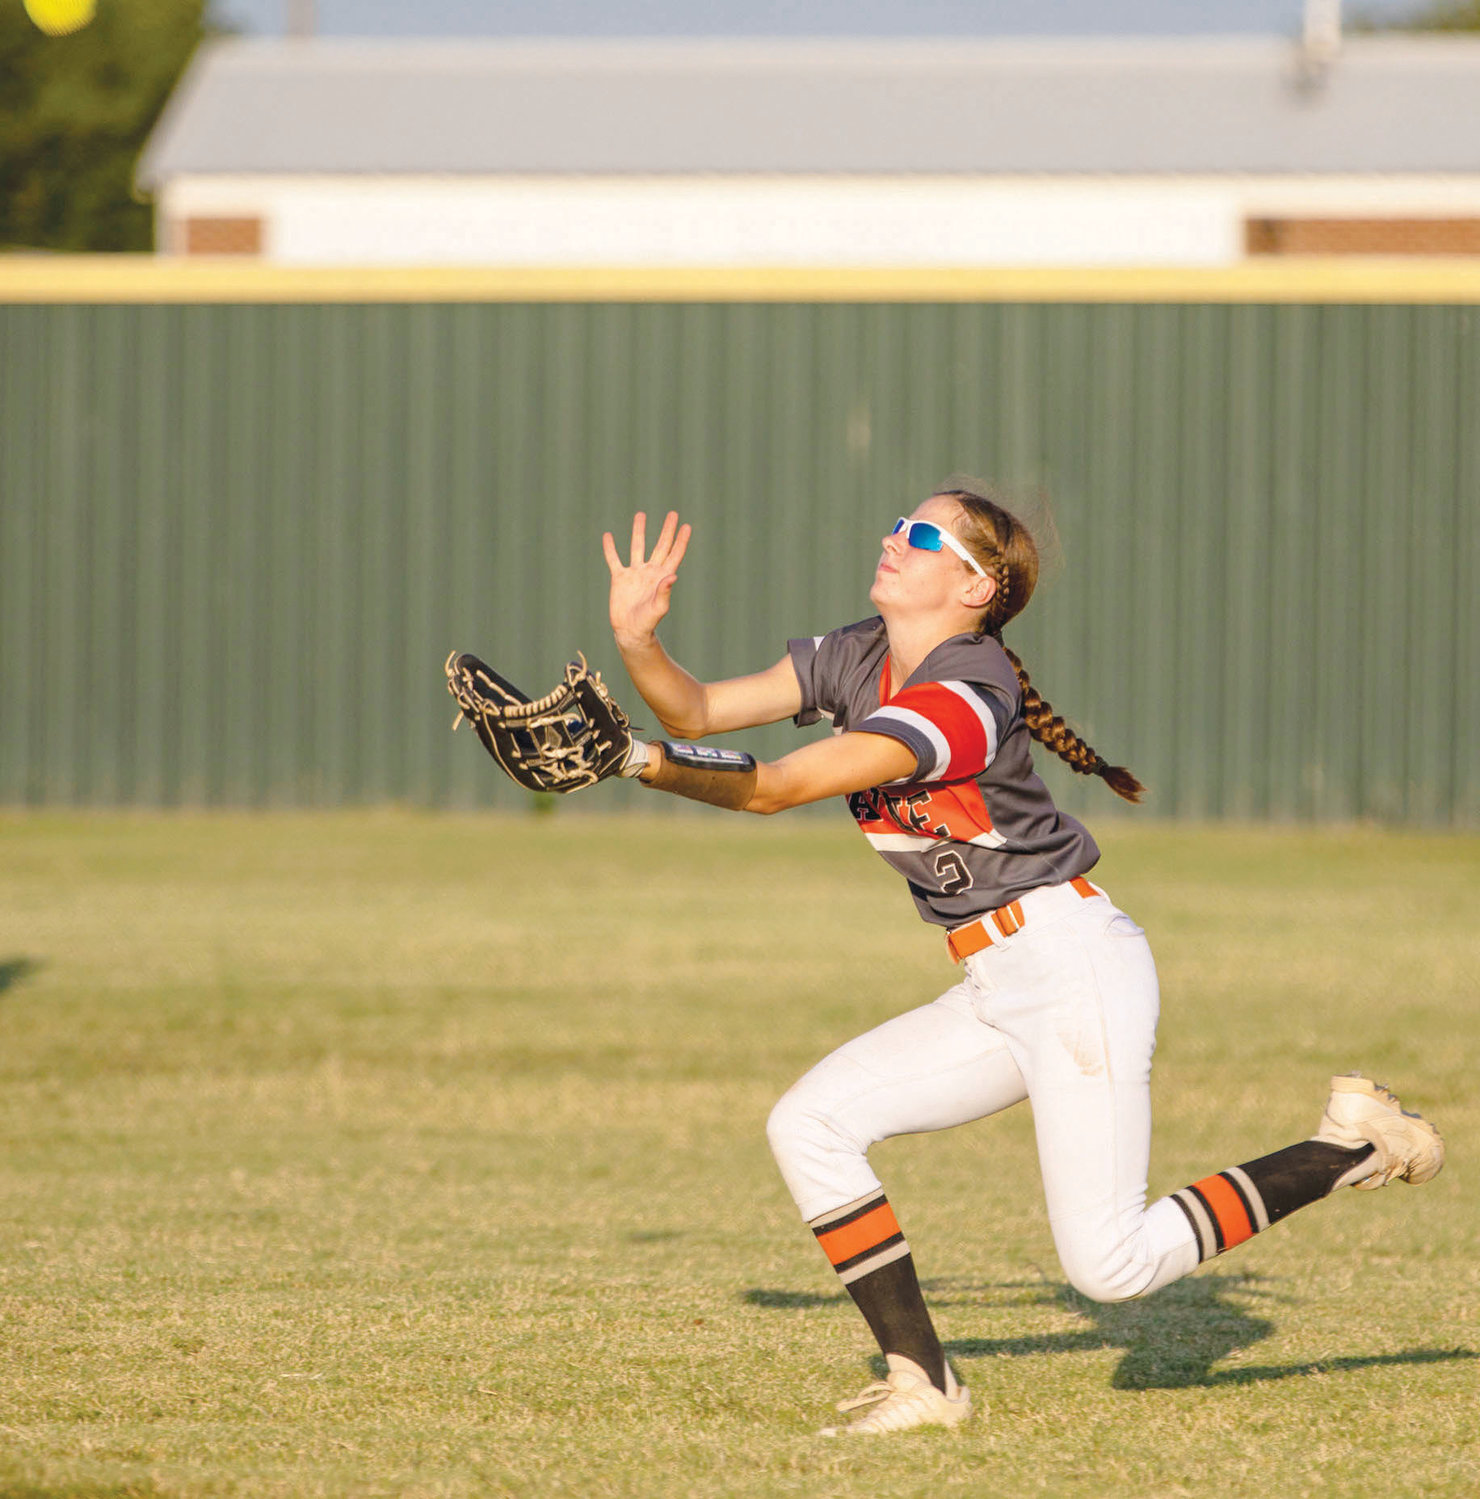 Wayne sophomore Haylee Durrence slides under a fly ball for an out Monday during the Bulldogs’ 9-2 win over Asher. Durrence made several plays for Wayne in the outfield in the game.